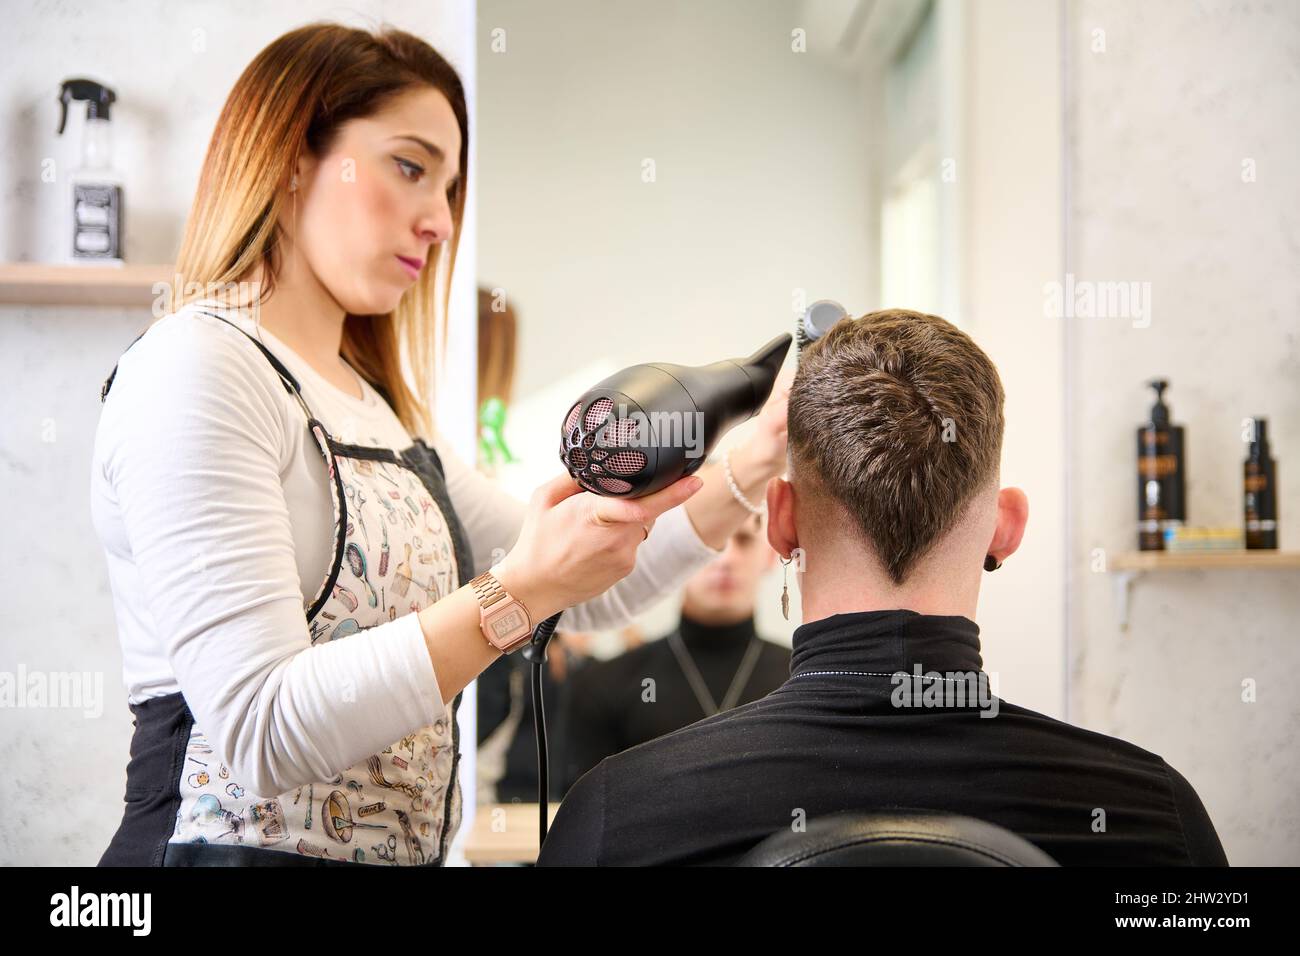 Hairdresser cutting hair and styling a client in the barbershop Stock Photo